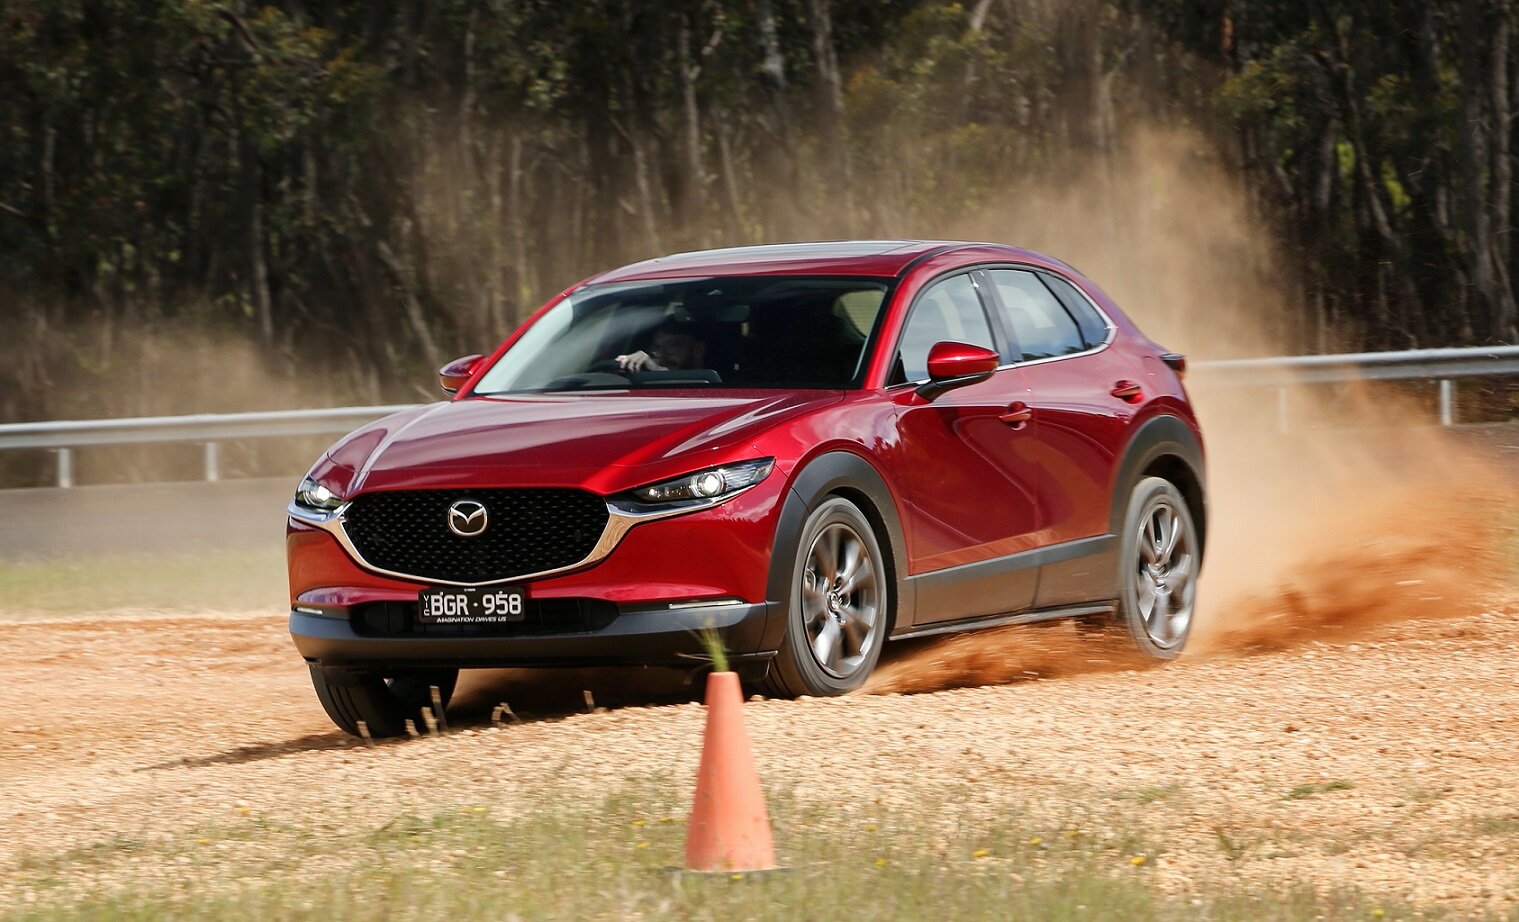 CX-30 is not a 'car of the year'.